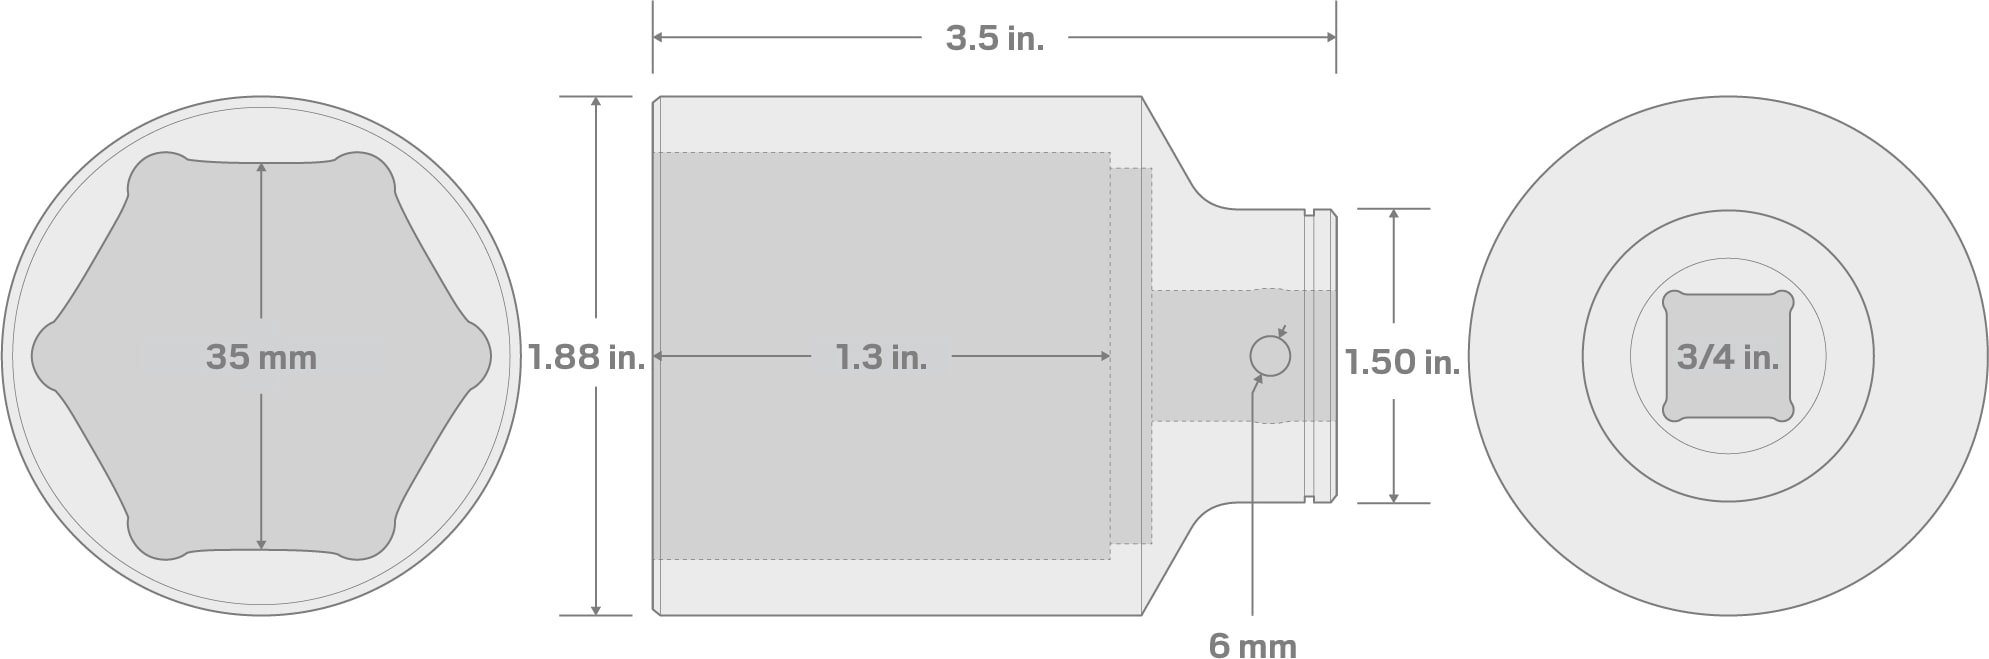 Specs for 3/4 Inch Drive x 35 mm Deep 6-Point Socket